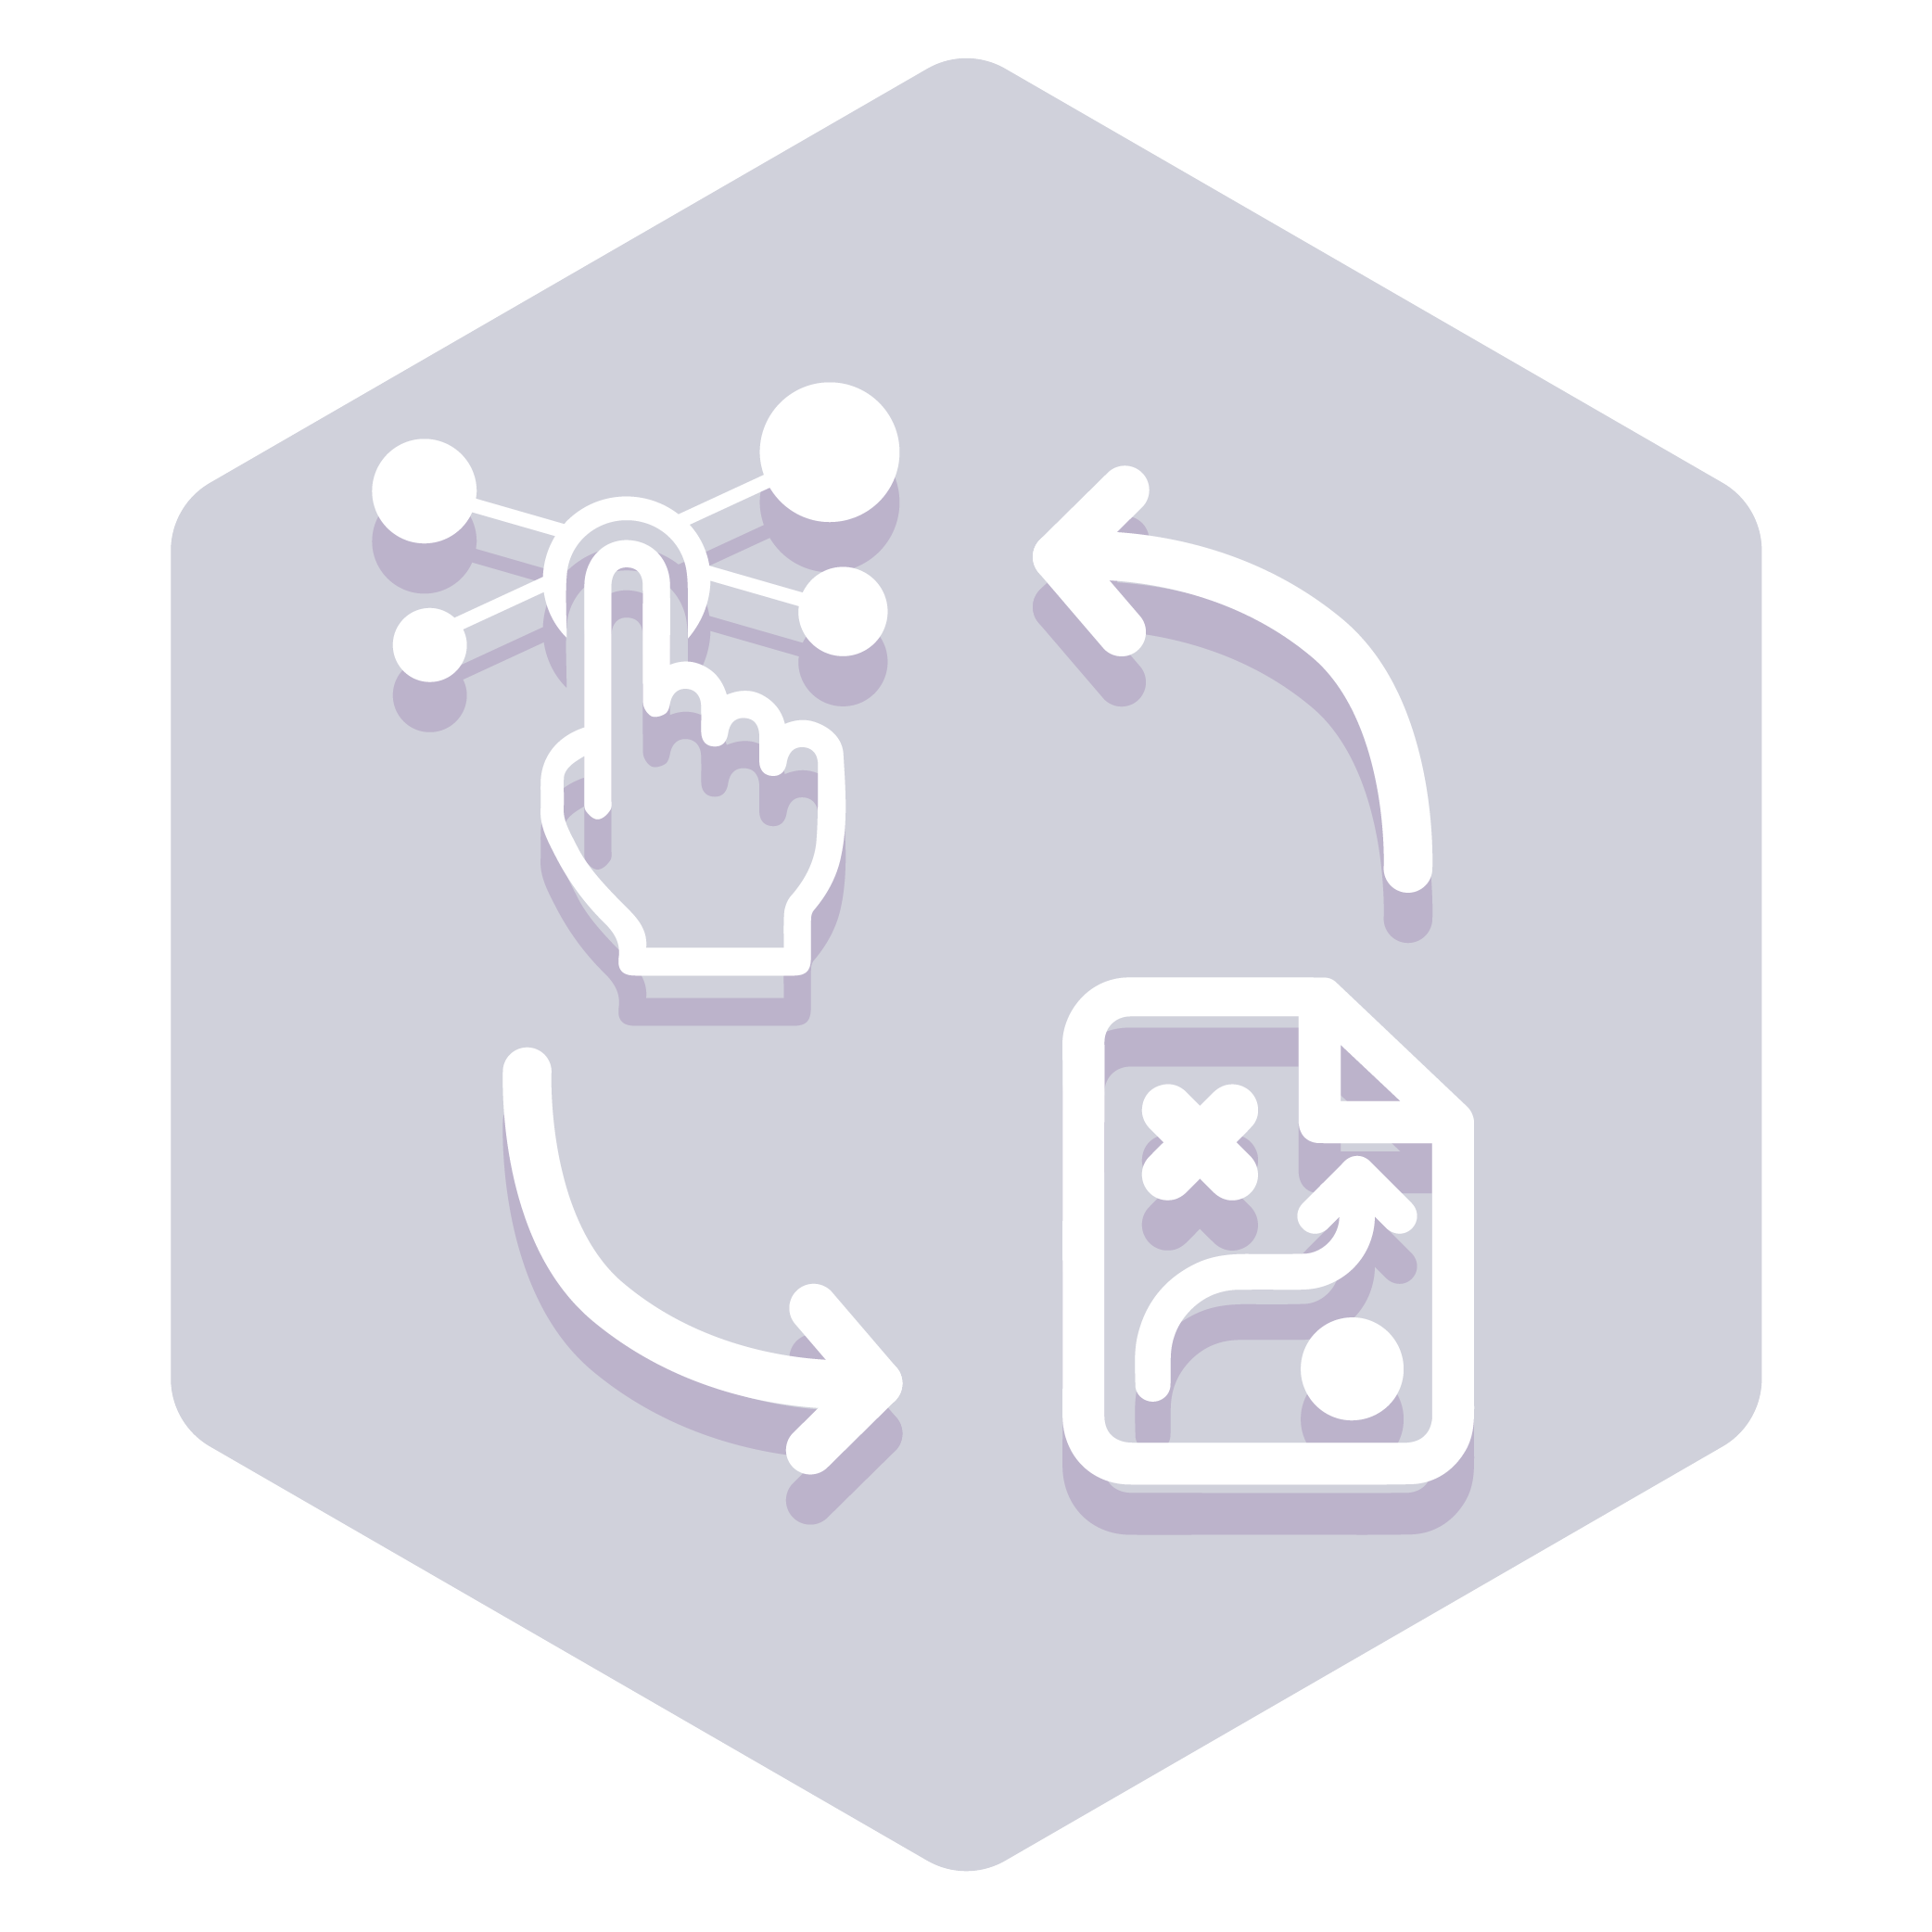 mission badge: User Experience (UX) Design